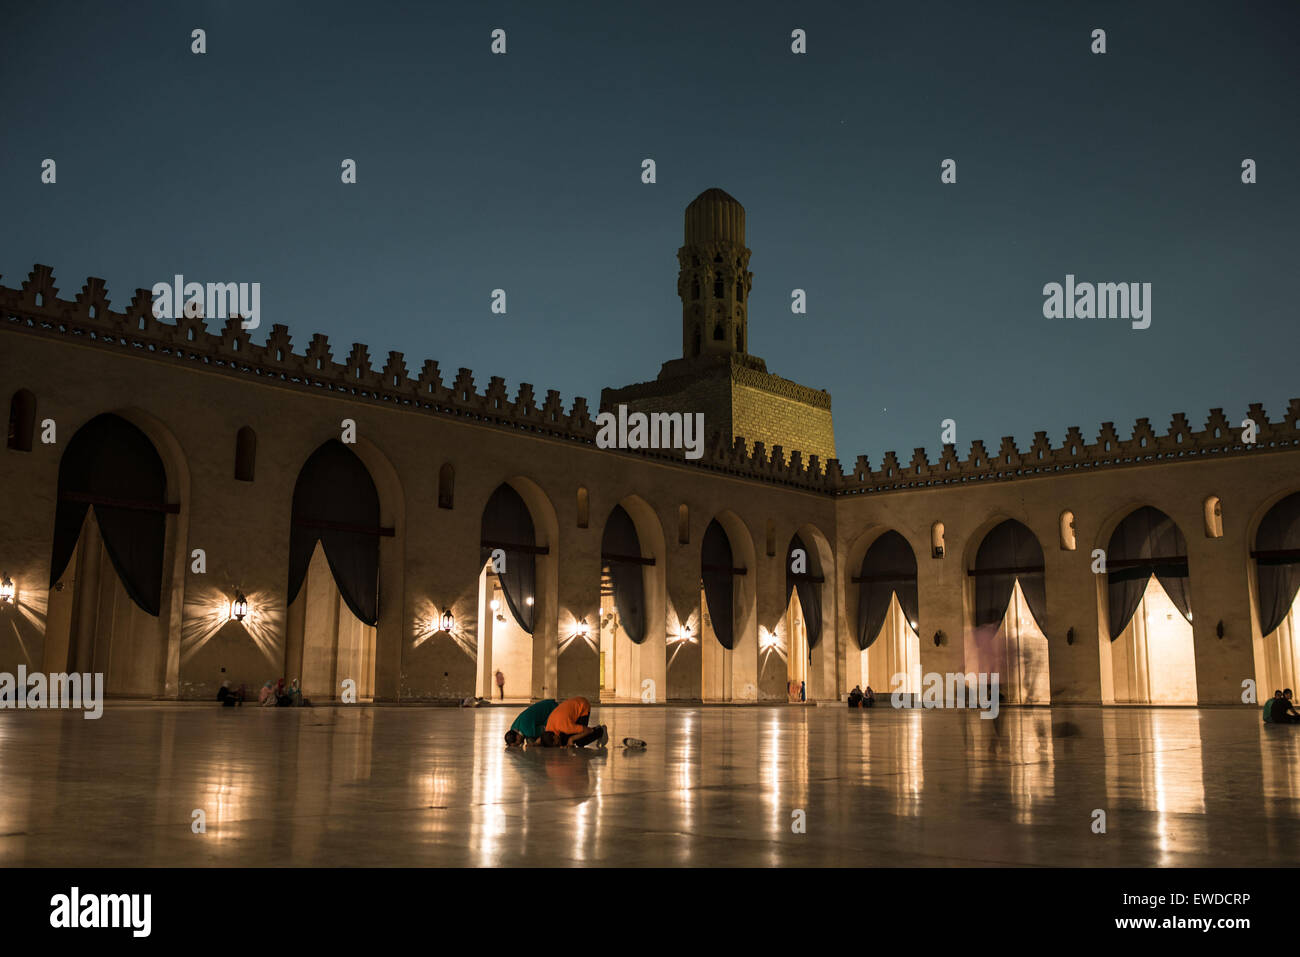 Cairo. 23rd June, 2015. Muslims pray at the Hakeem Mosque in Cairo, Egypt, on June 23, 2015, during the holy fasting month Ramadan. © Pan Chaoyue/Xinhua/Alamy Live News Stock Photo